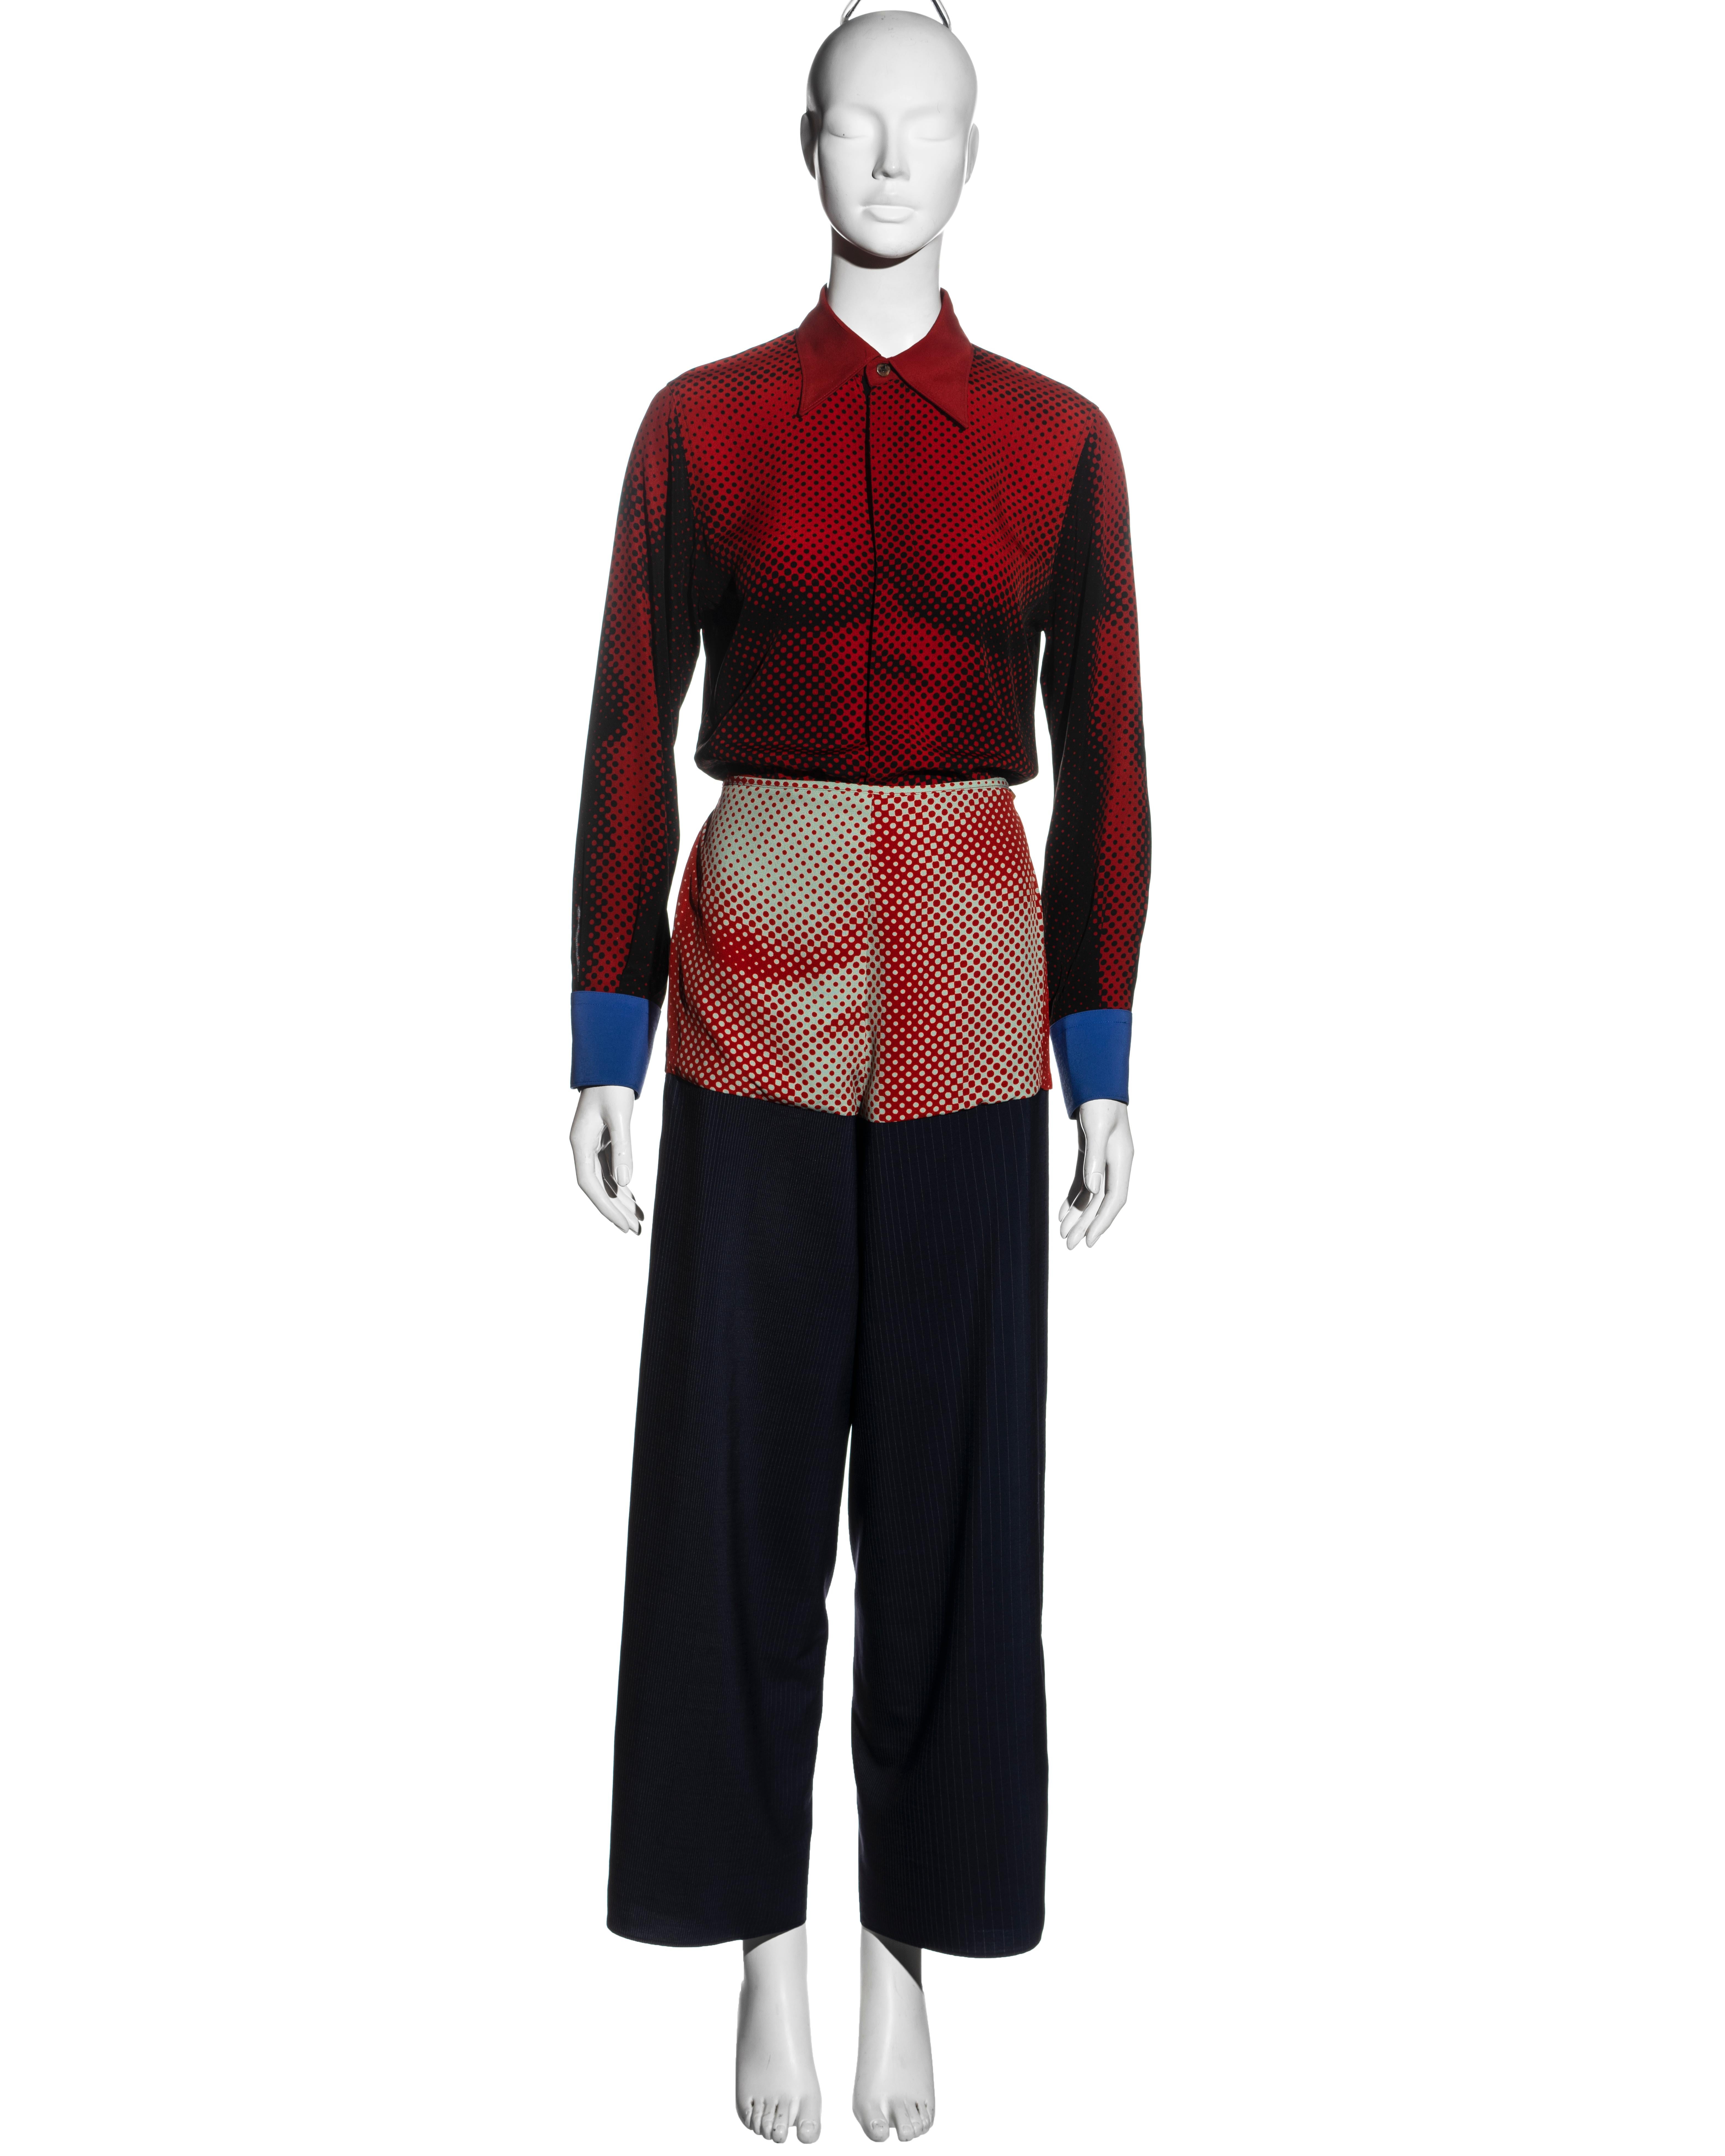 ▪ Jean Paul Gaultier red and navy 'cyber-hippe' pant suit 
▪ Red and black button-up shirt with trompe l'oeil print of a male torso 
▪ Blue cuffs 
▪ Wide-leg wrap patchwork wrap pants of pinstripe wool and a matching male torso print 
▪ Tan leather